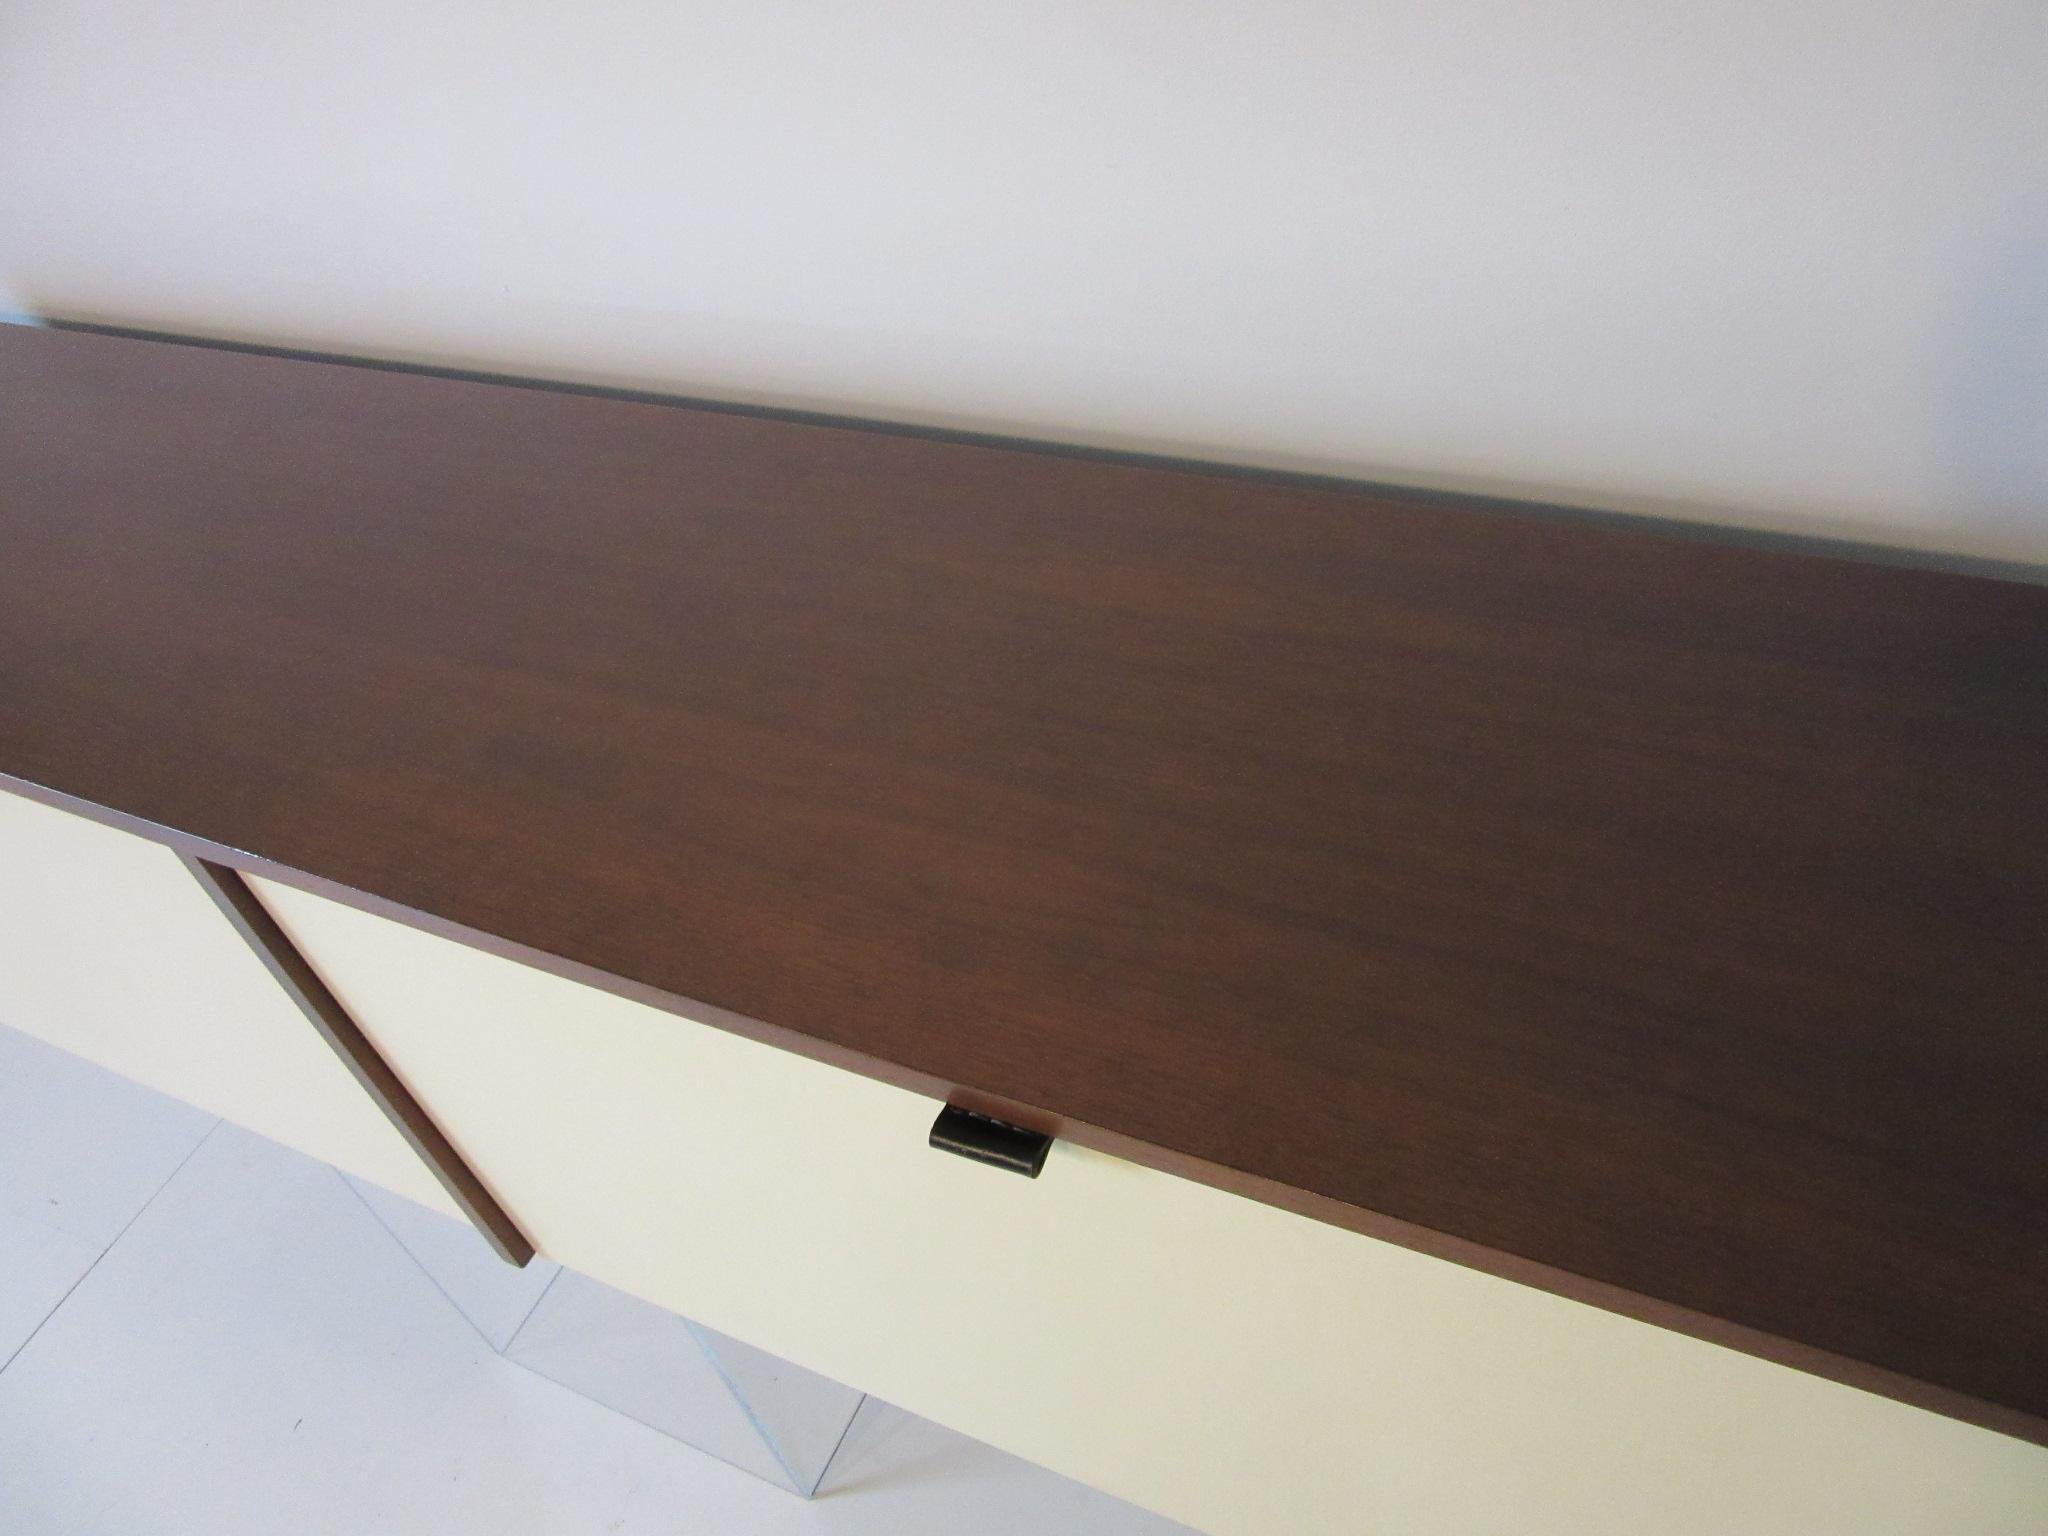 American Knoll Hanging Credenza / Cabinet Designed by Florence Knoll